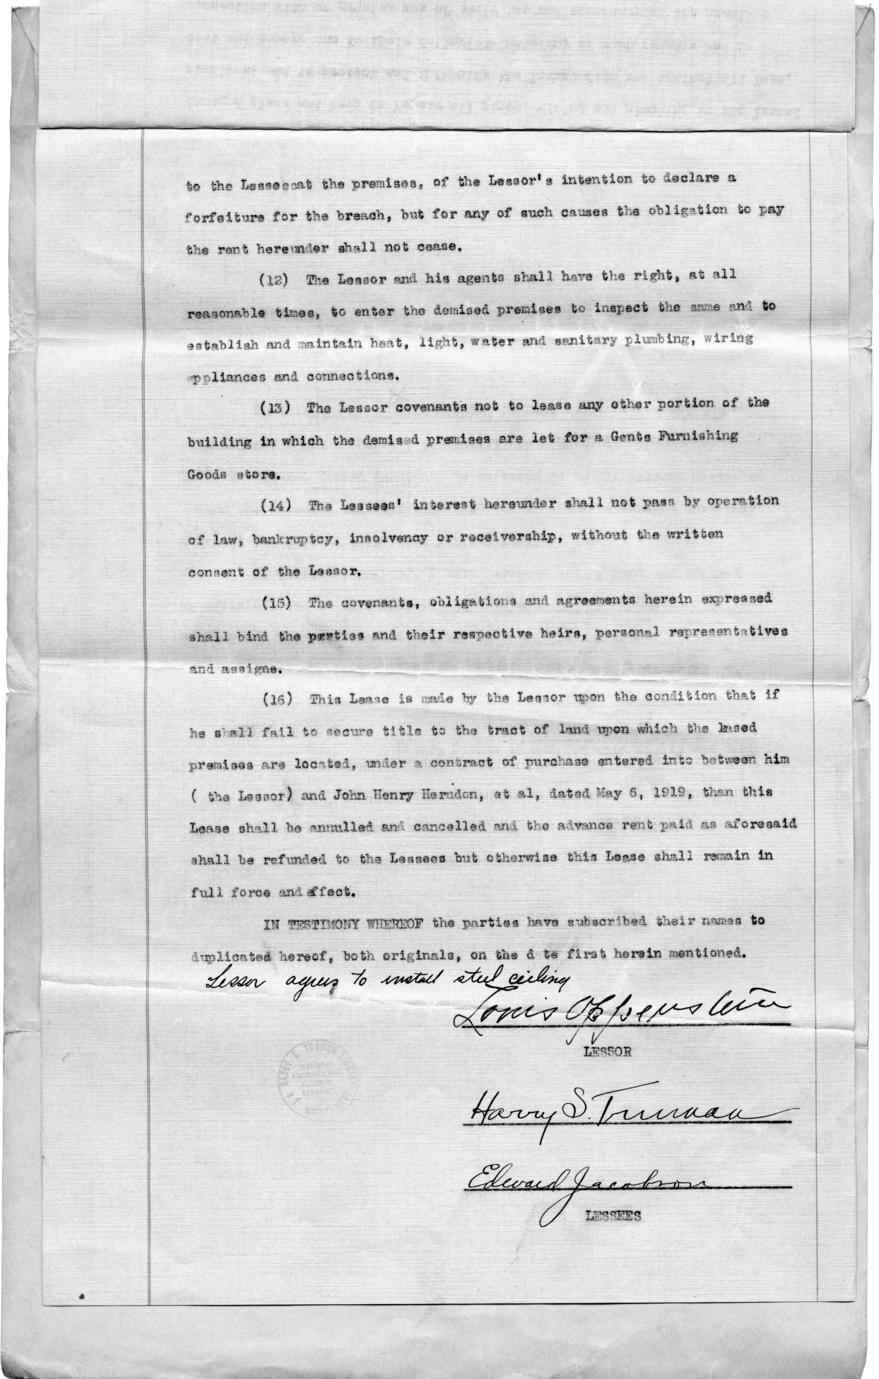 Lease, Louis Oppenstein to Harry S. Truman and Edward Jacobson